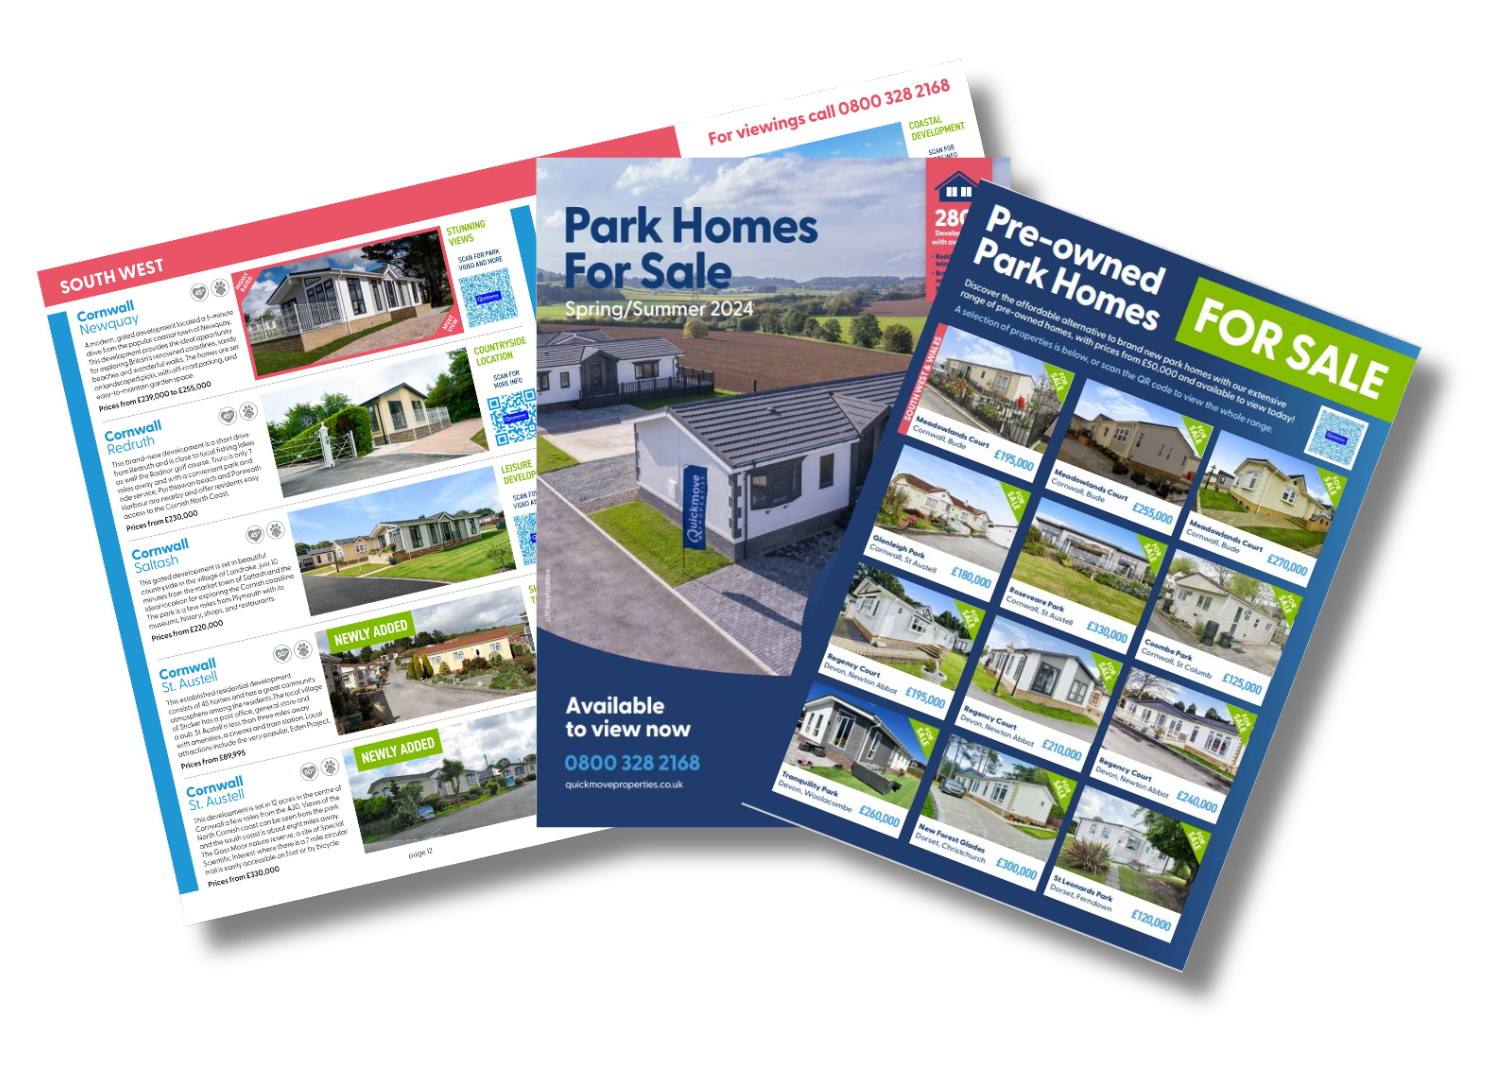 Quickmove's Spring/Summer 2024 Park Homes For Sale Brochures